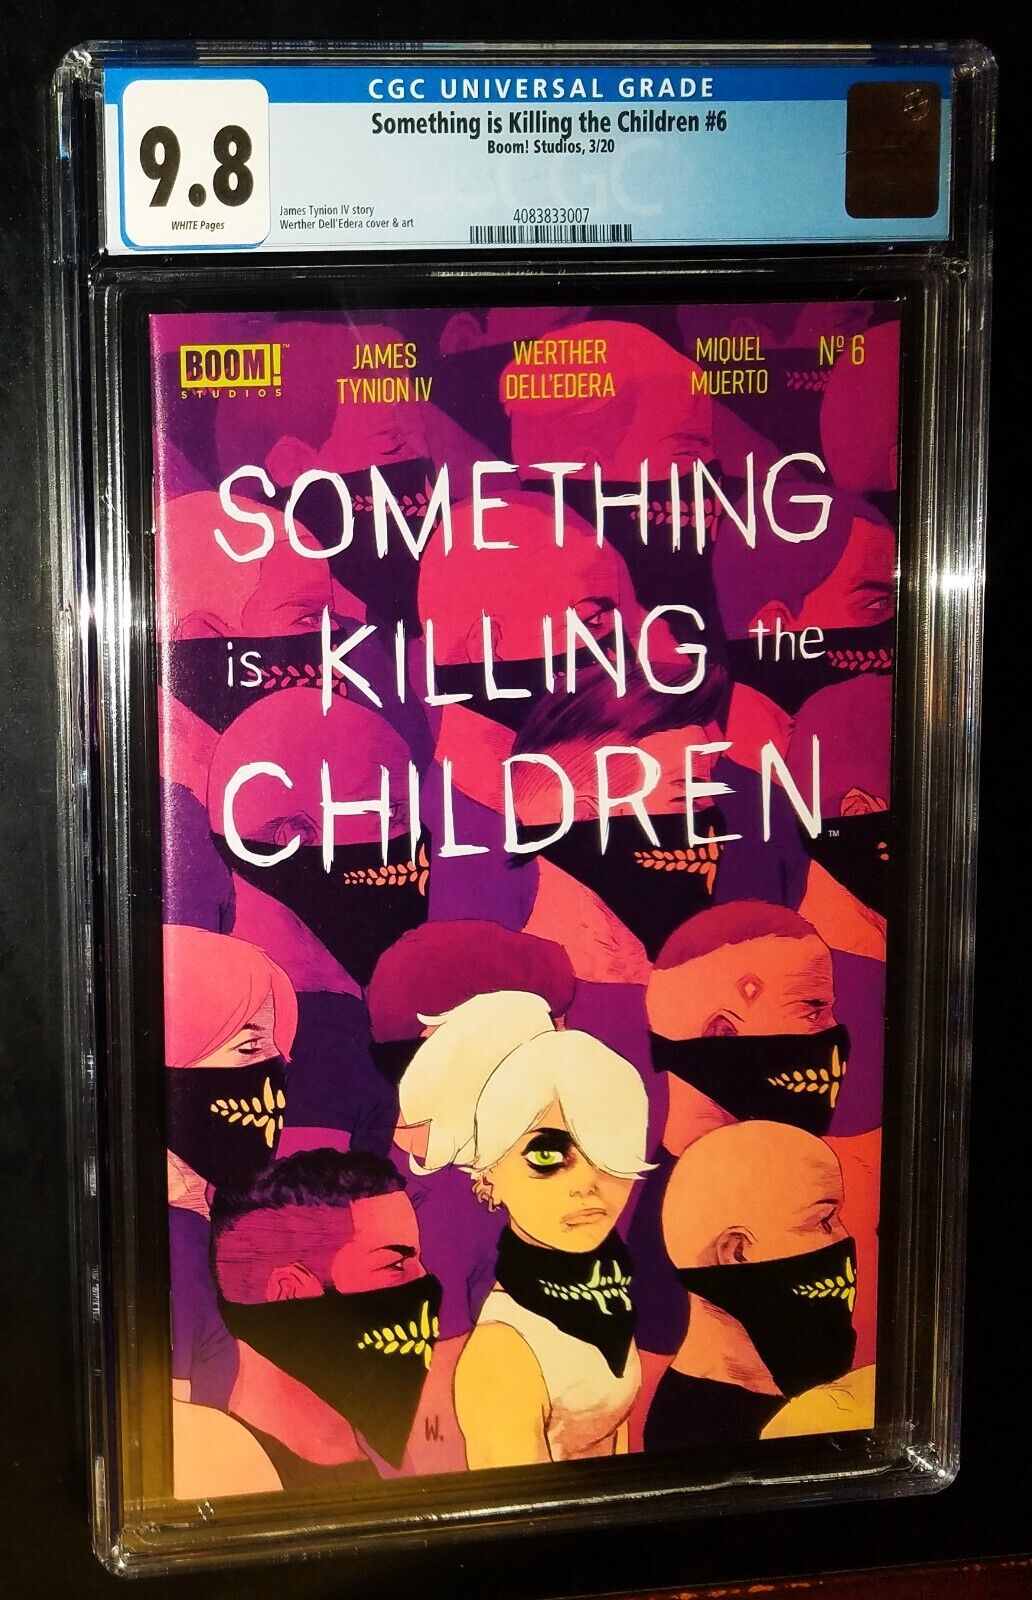 SOMETHING IS KILLING THE CHILDREN #6 2020 Boom Comics CGC 9.8 NM/MT White Pages